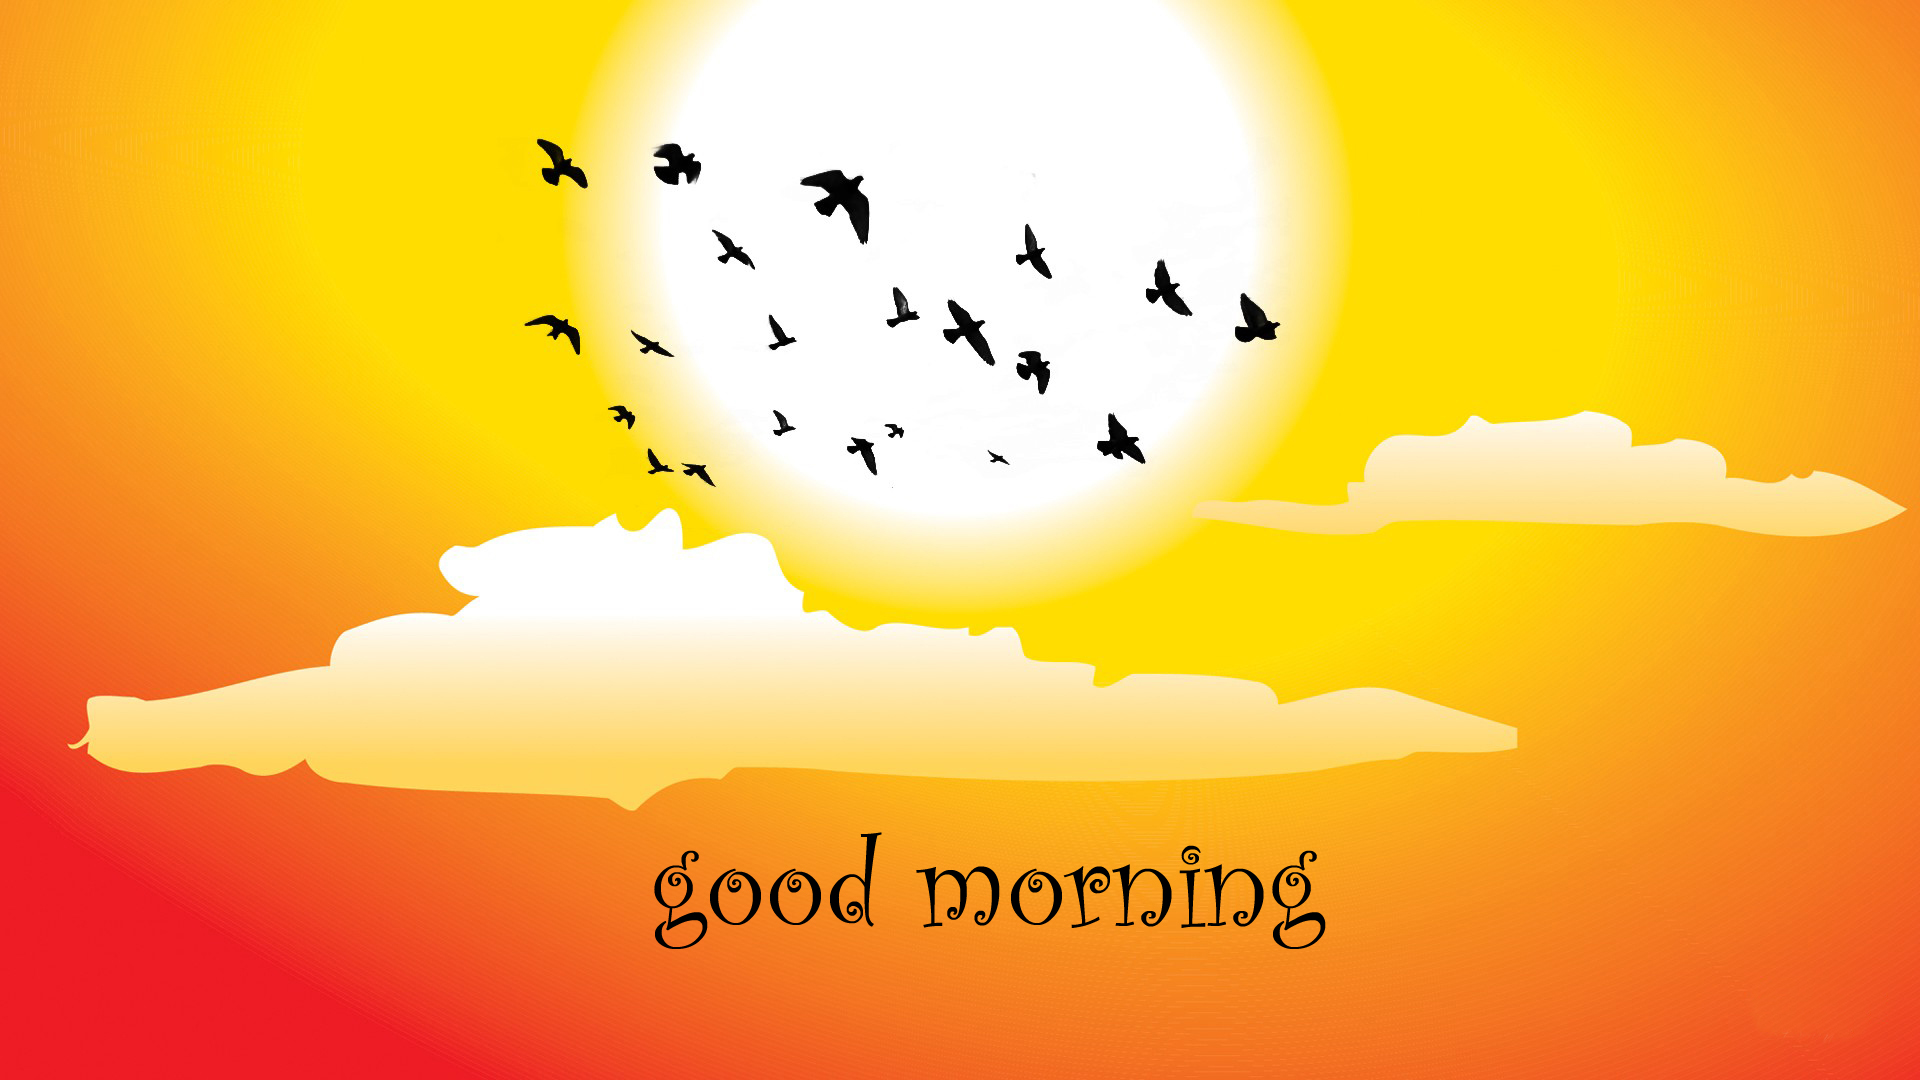 Good Morning HD Wallpaper Amp Pictures